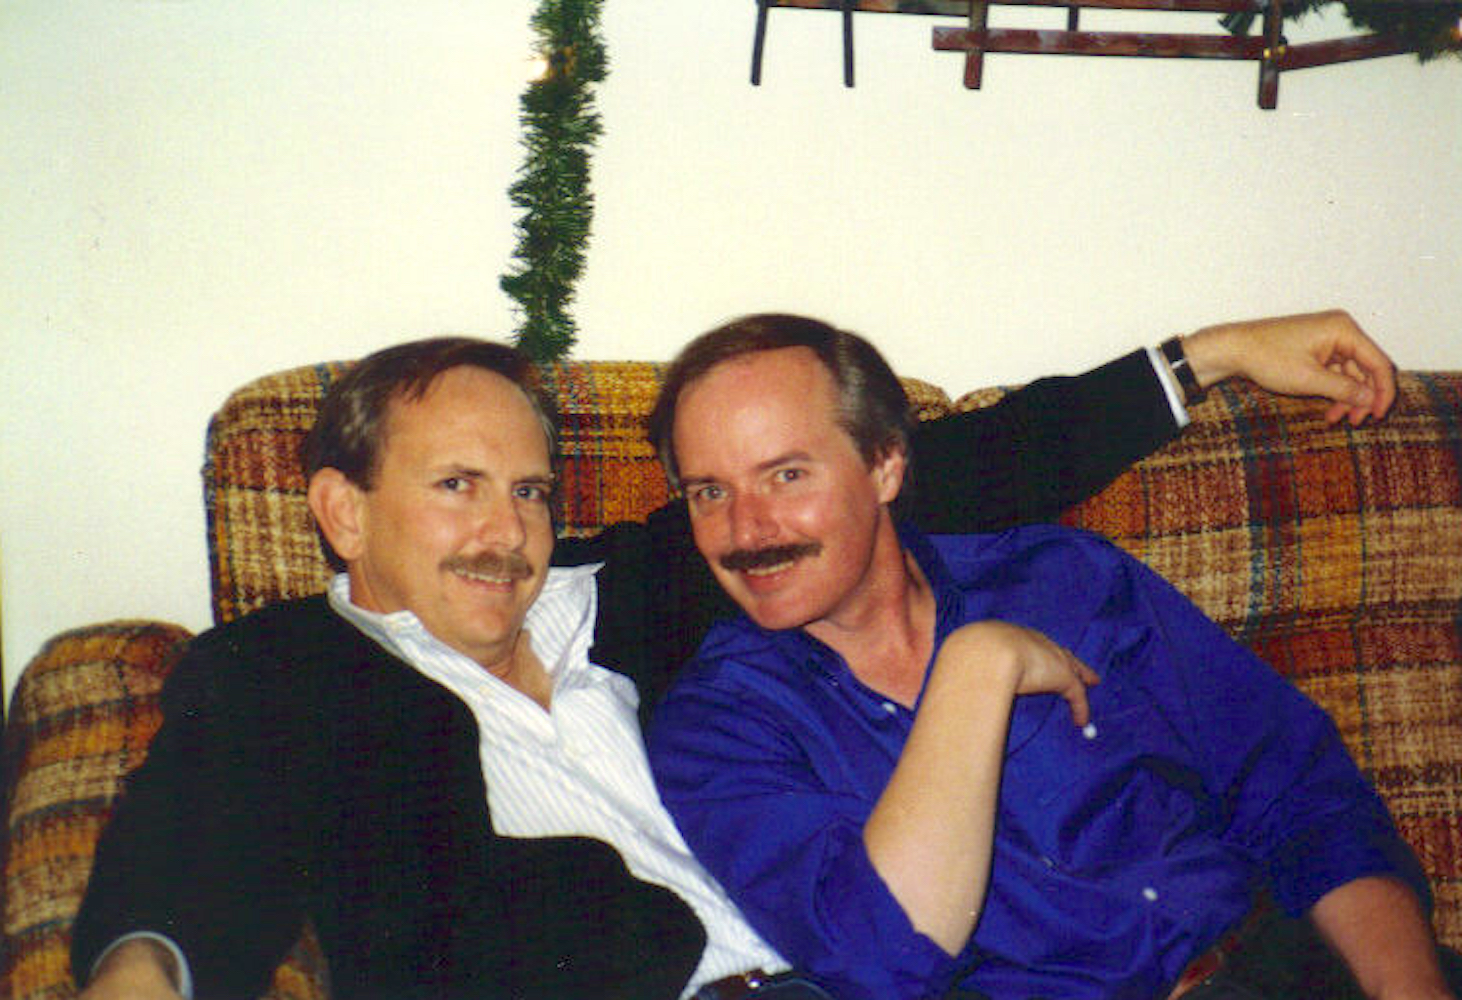 William Waybourn and his partner Craig Spaulding on a sofa at Linda Mitchell’s house watching the evening news, Dallas, TX, circa 1988. William shares, “Linda taped every news program on her VCR and later donated all the clips to The Dallas Way history project.” Photo courtesy of William Waybourn.